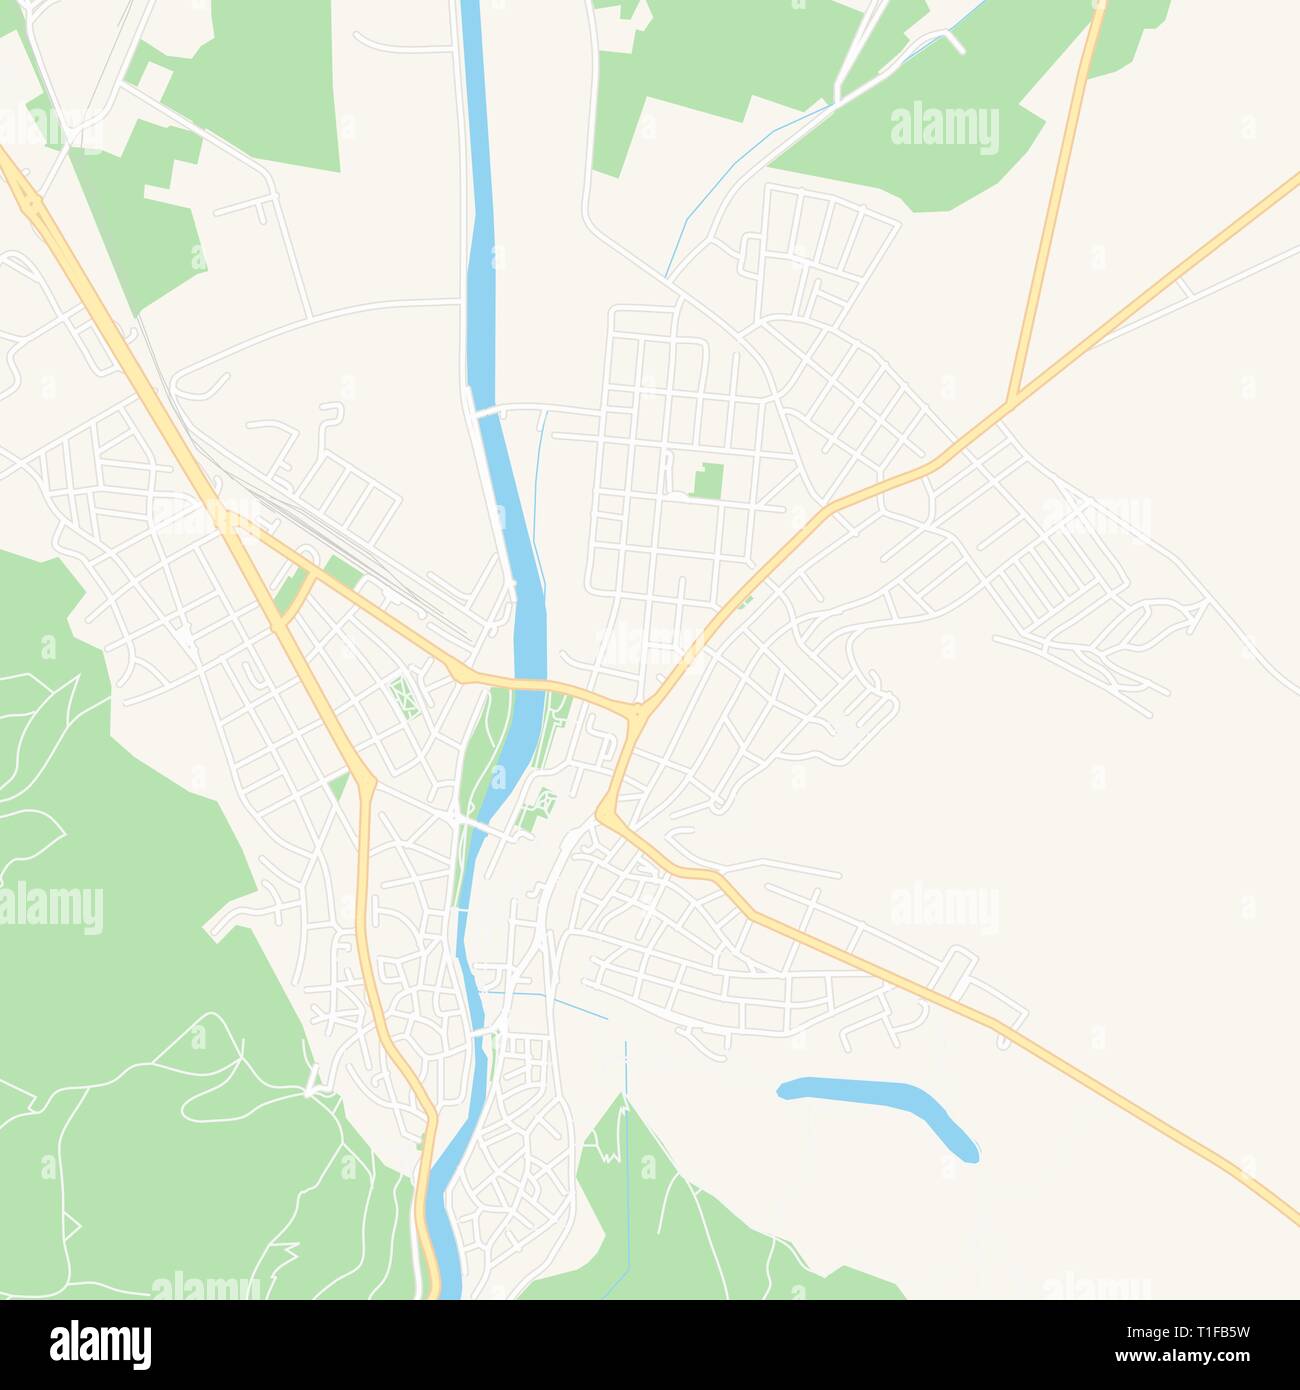 Printable map of Asenovgrad, Bulgaria with main and secondary roads and larger railways. This map is carefully designed for routing and placing indivi Stock Vector